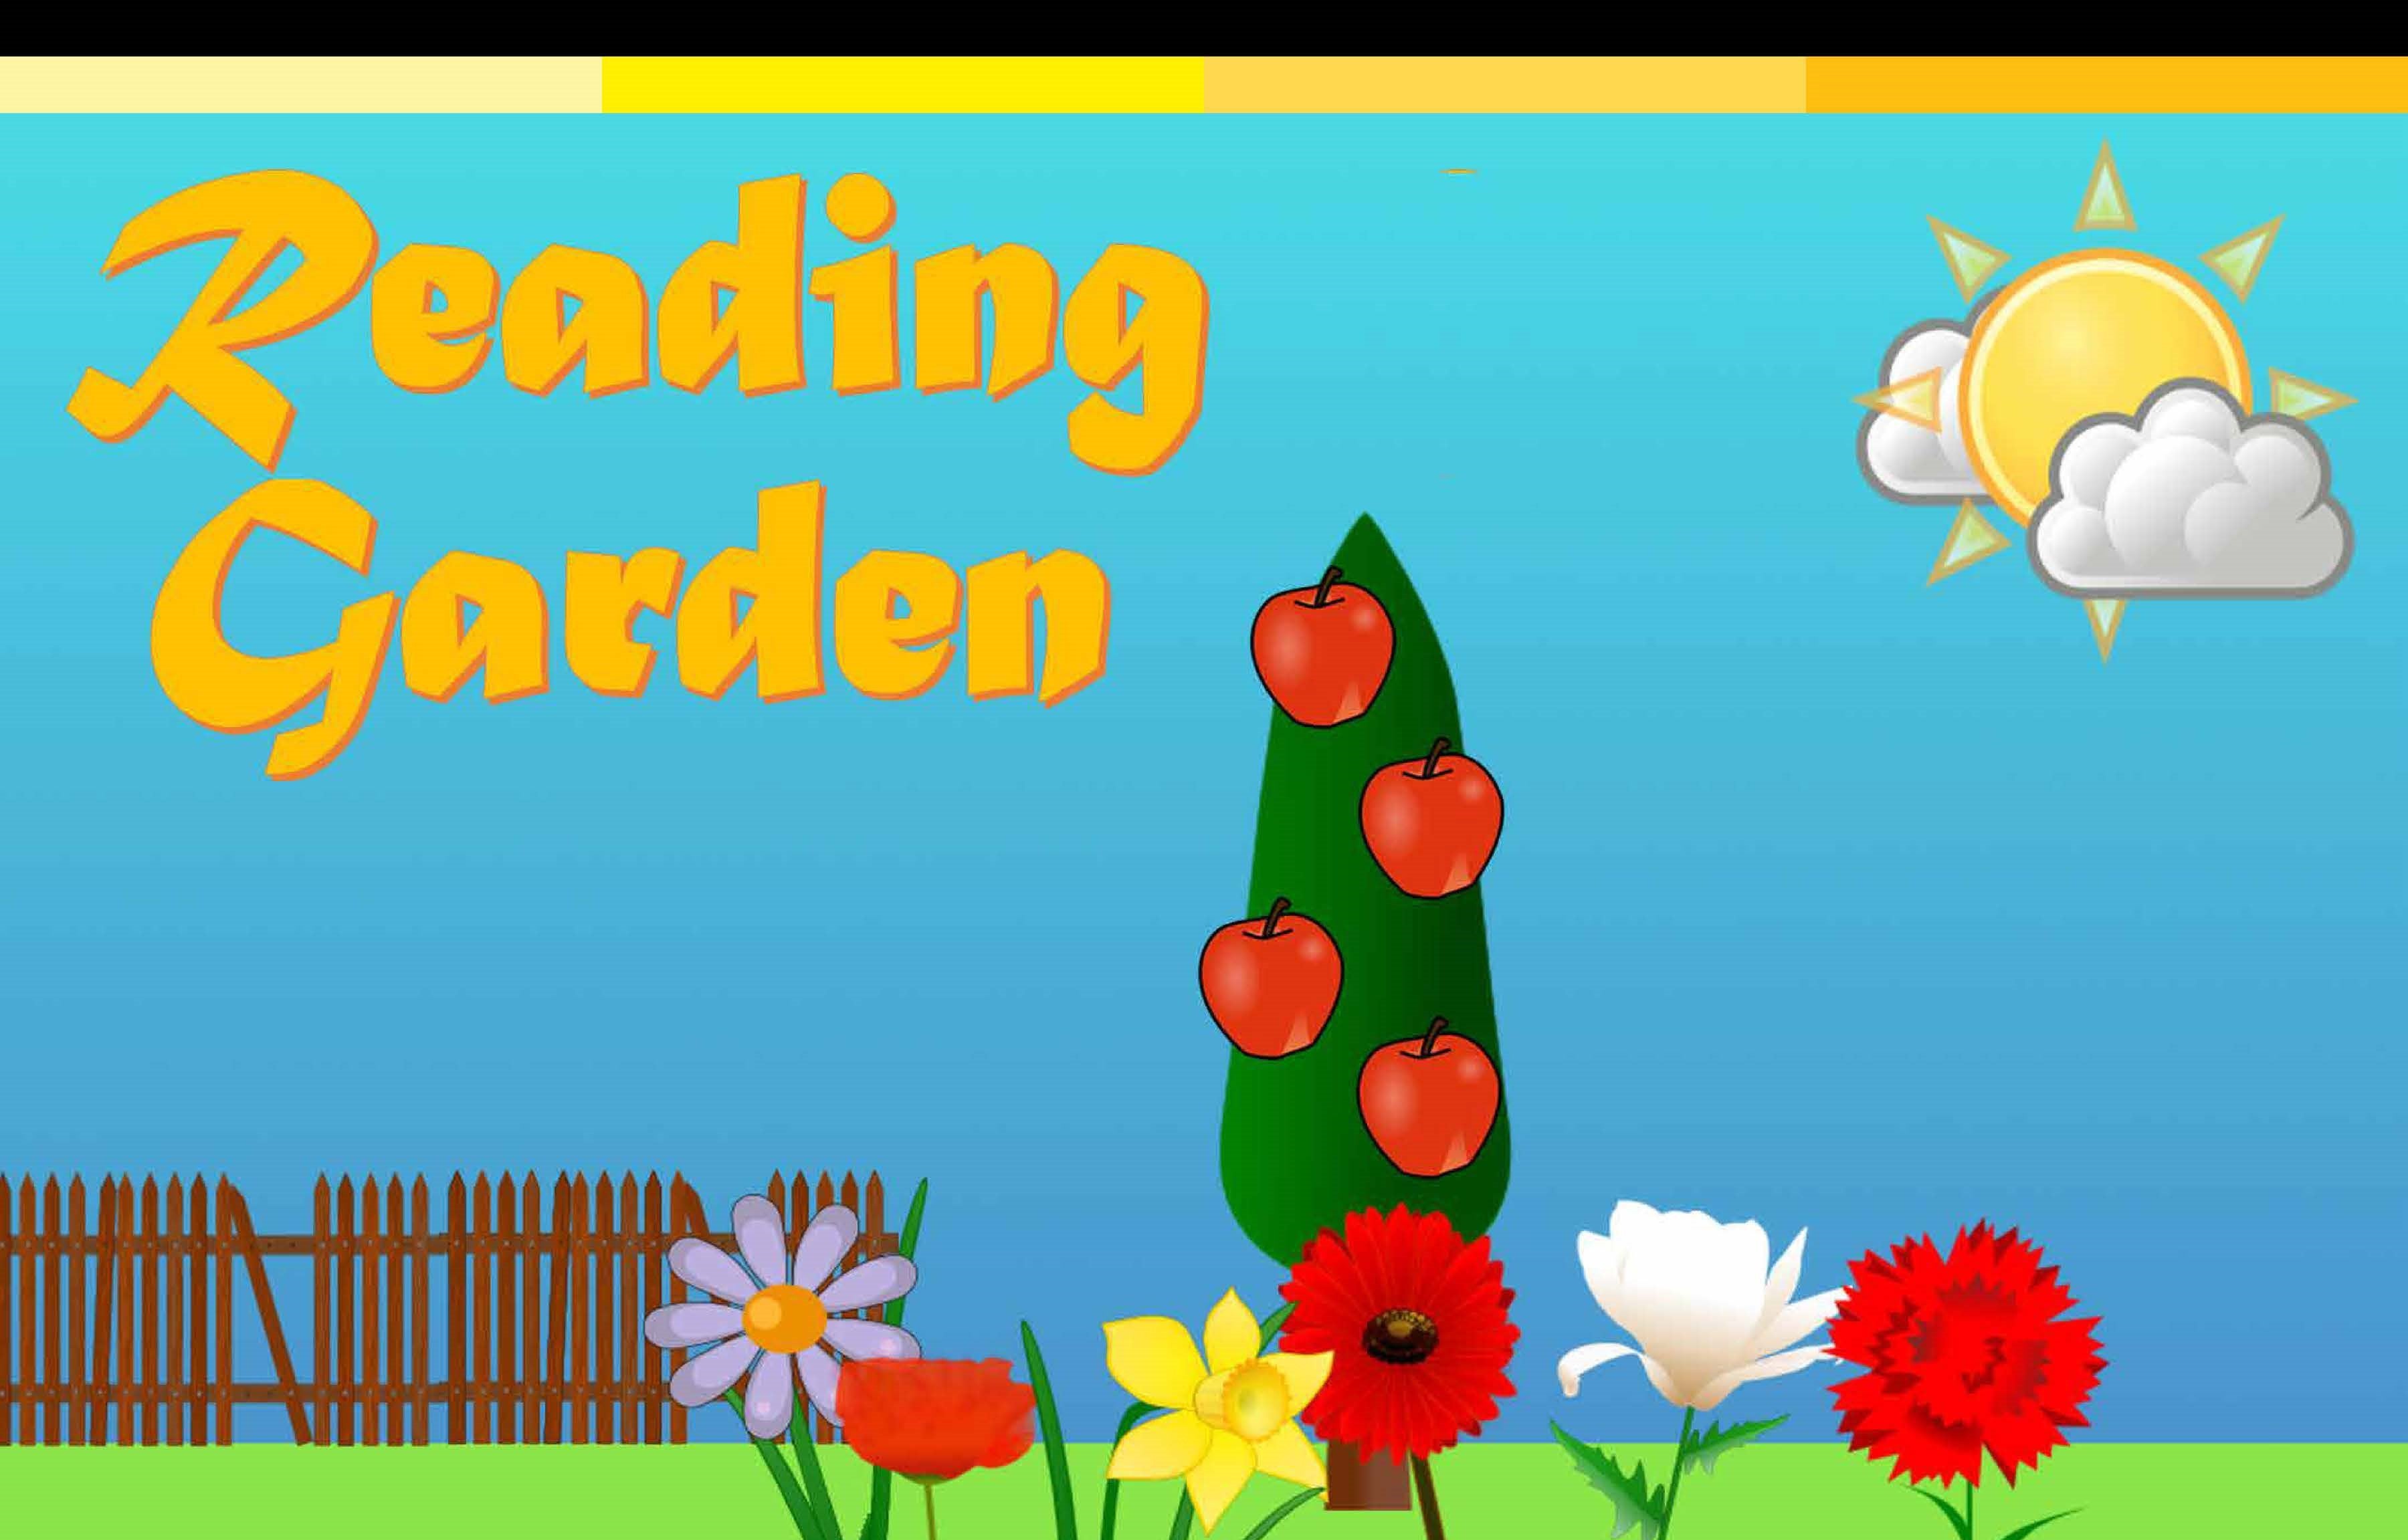 Reading Garden poster title with 2D graphics of apple tree and flowers on a field